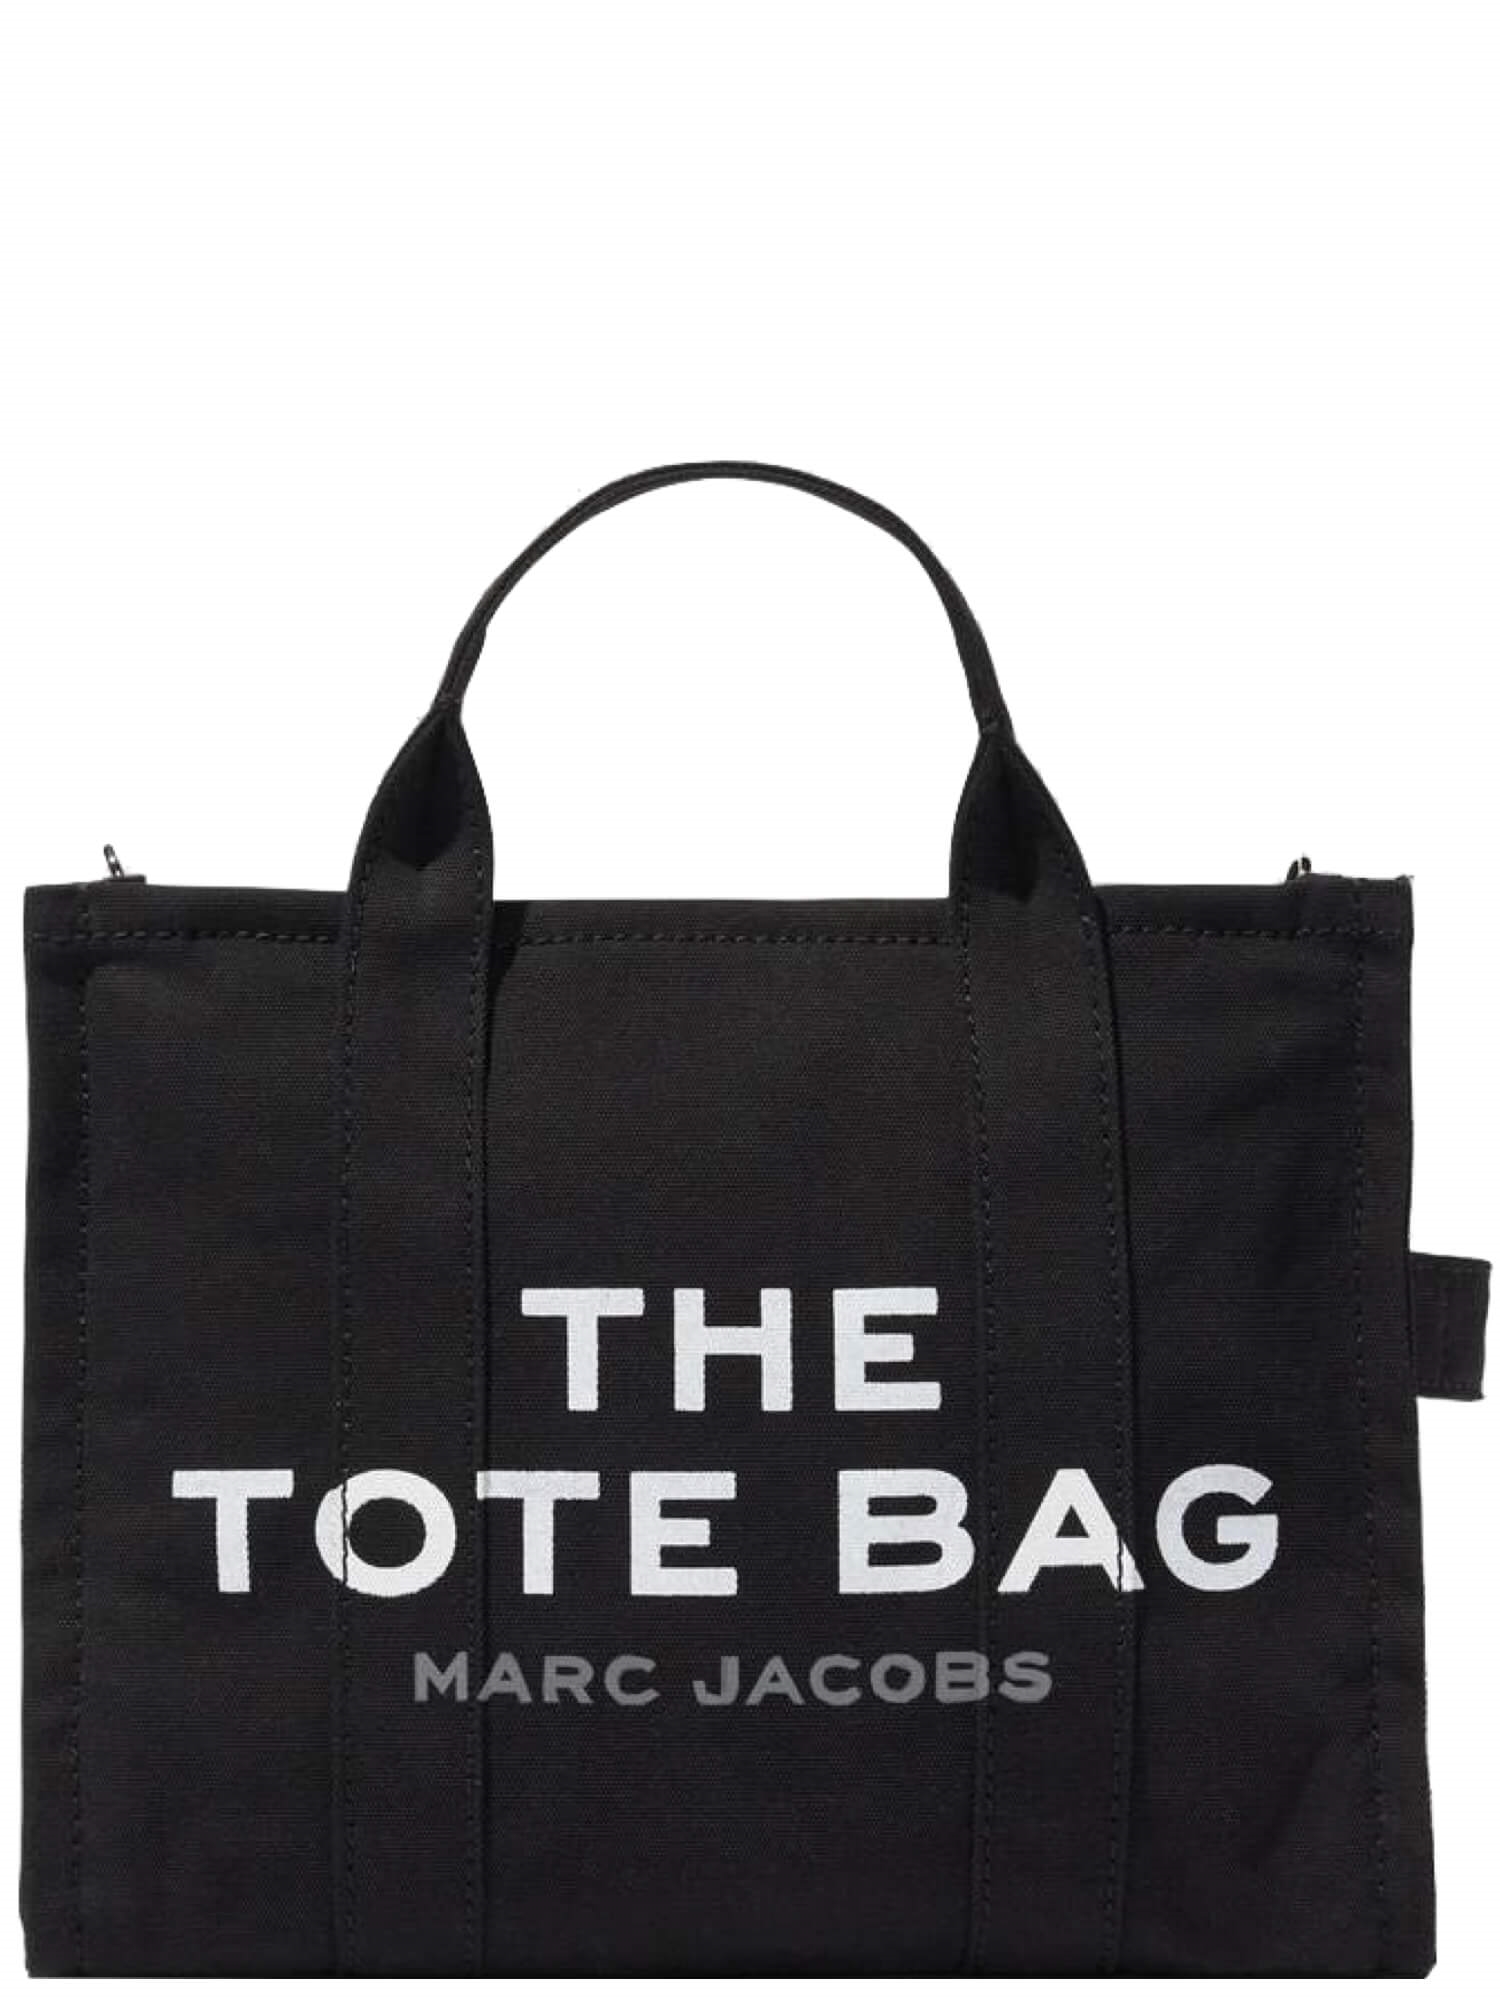 Marc Jacobs The Tote Bag, Sort ⇒ Shop her